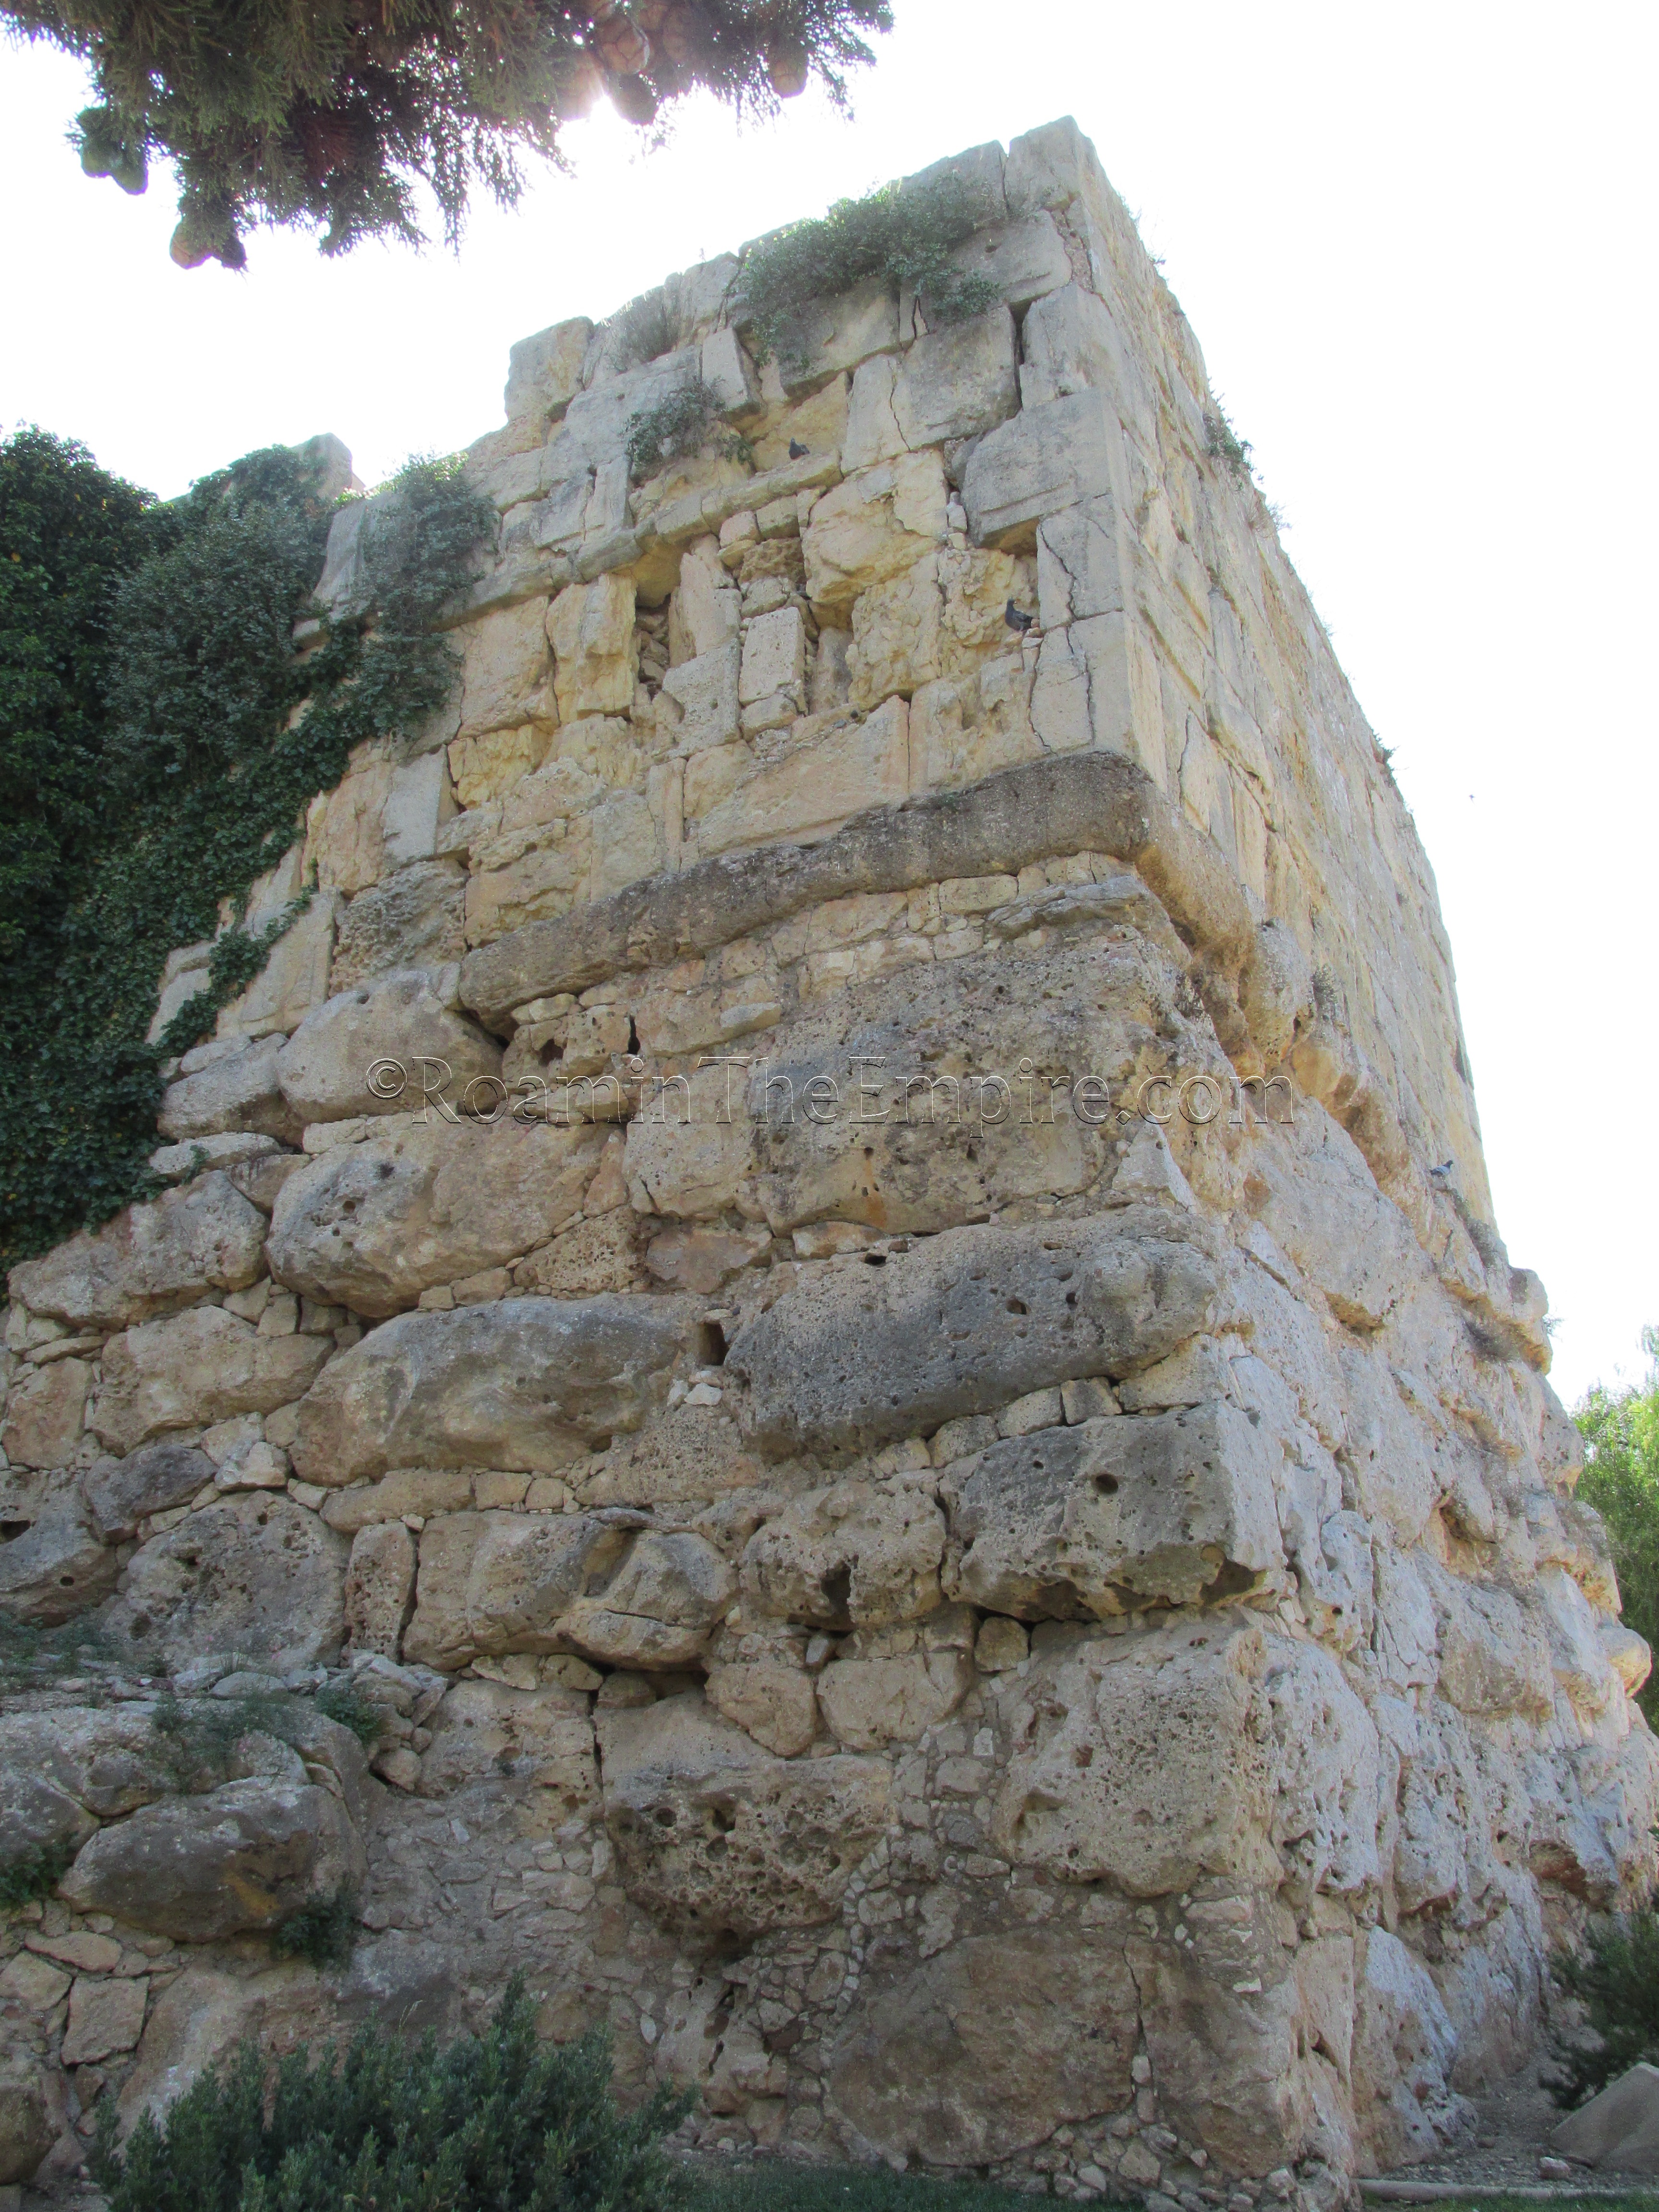 Tower of Minerva, named so because of a relief of Minerva in thew walls here. Tarraco.